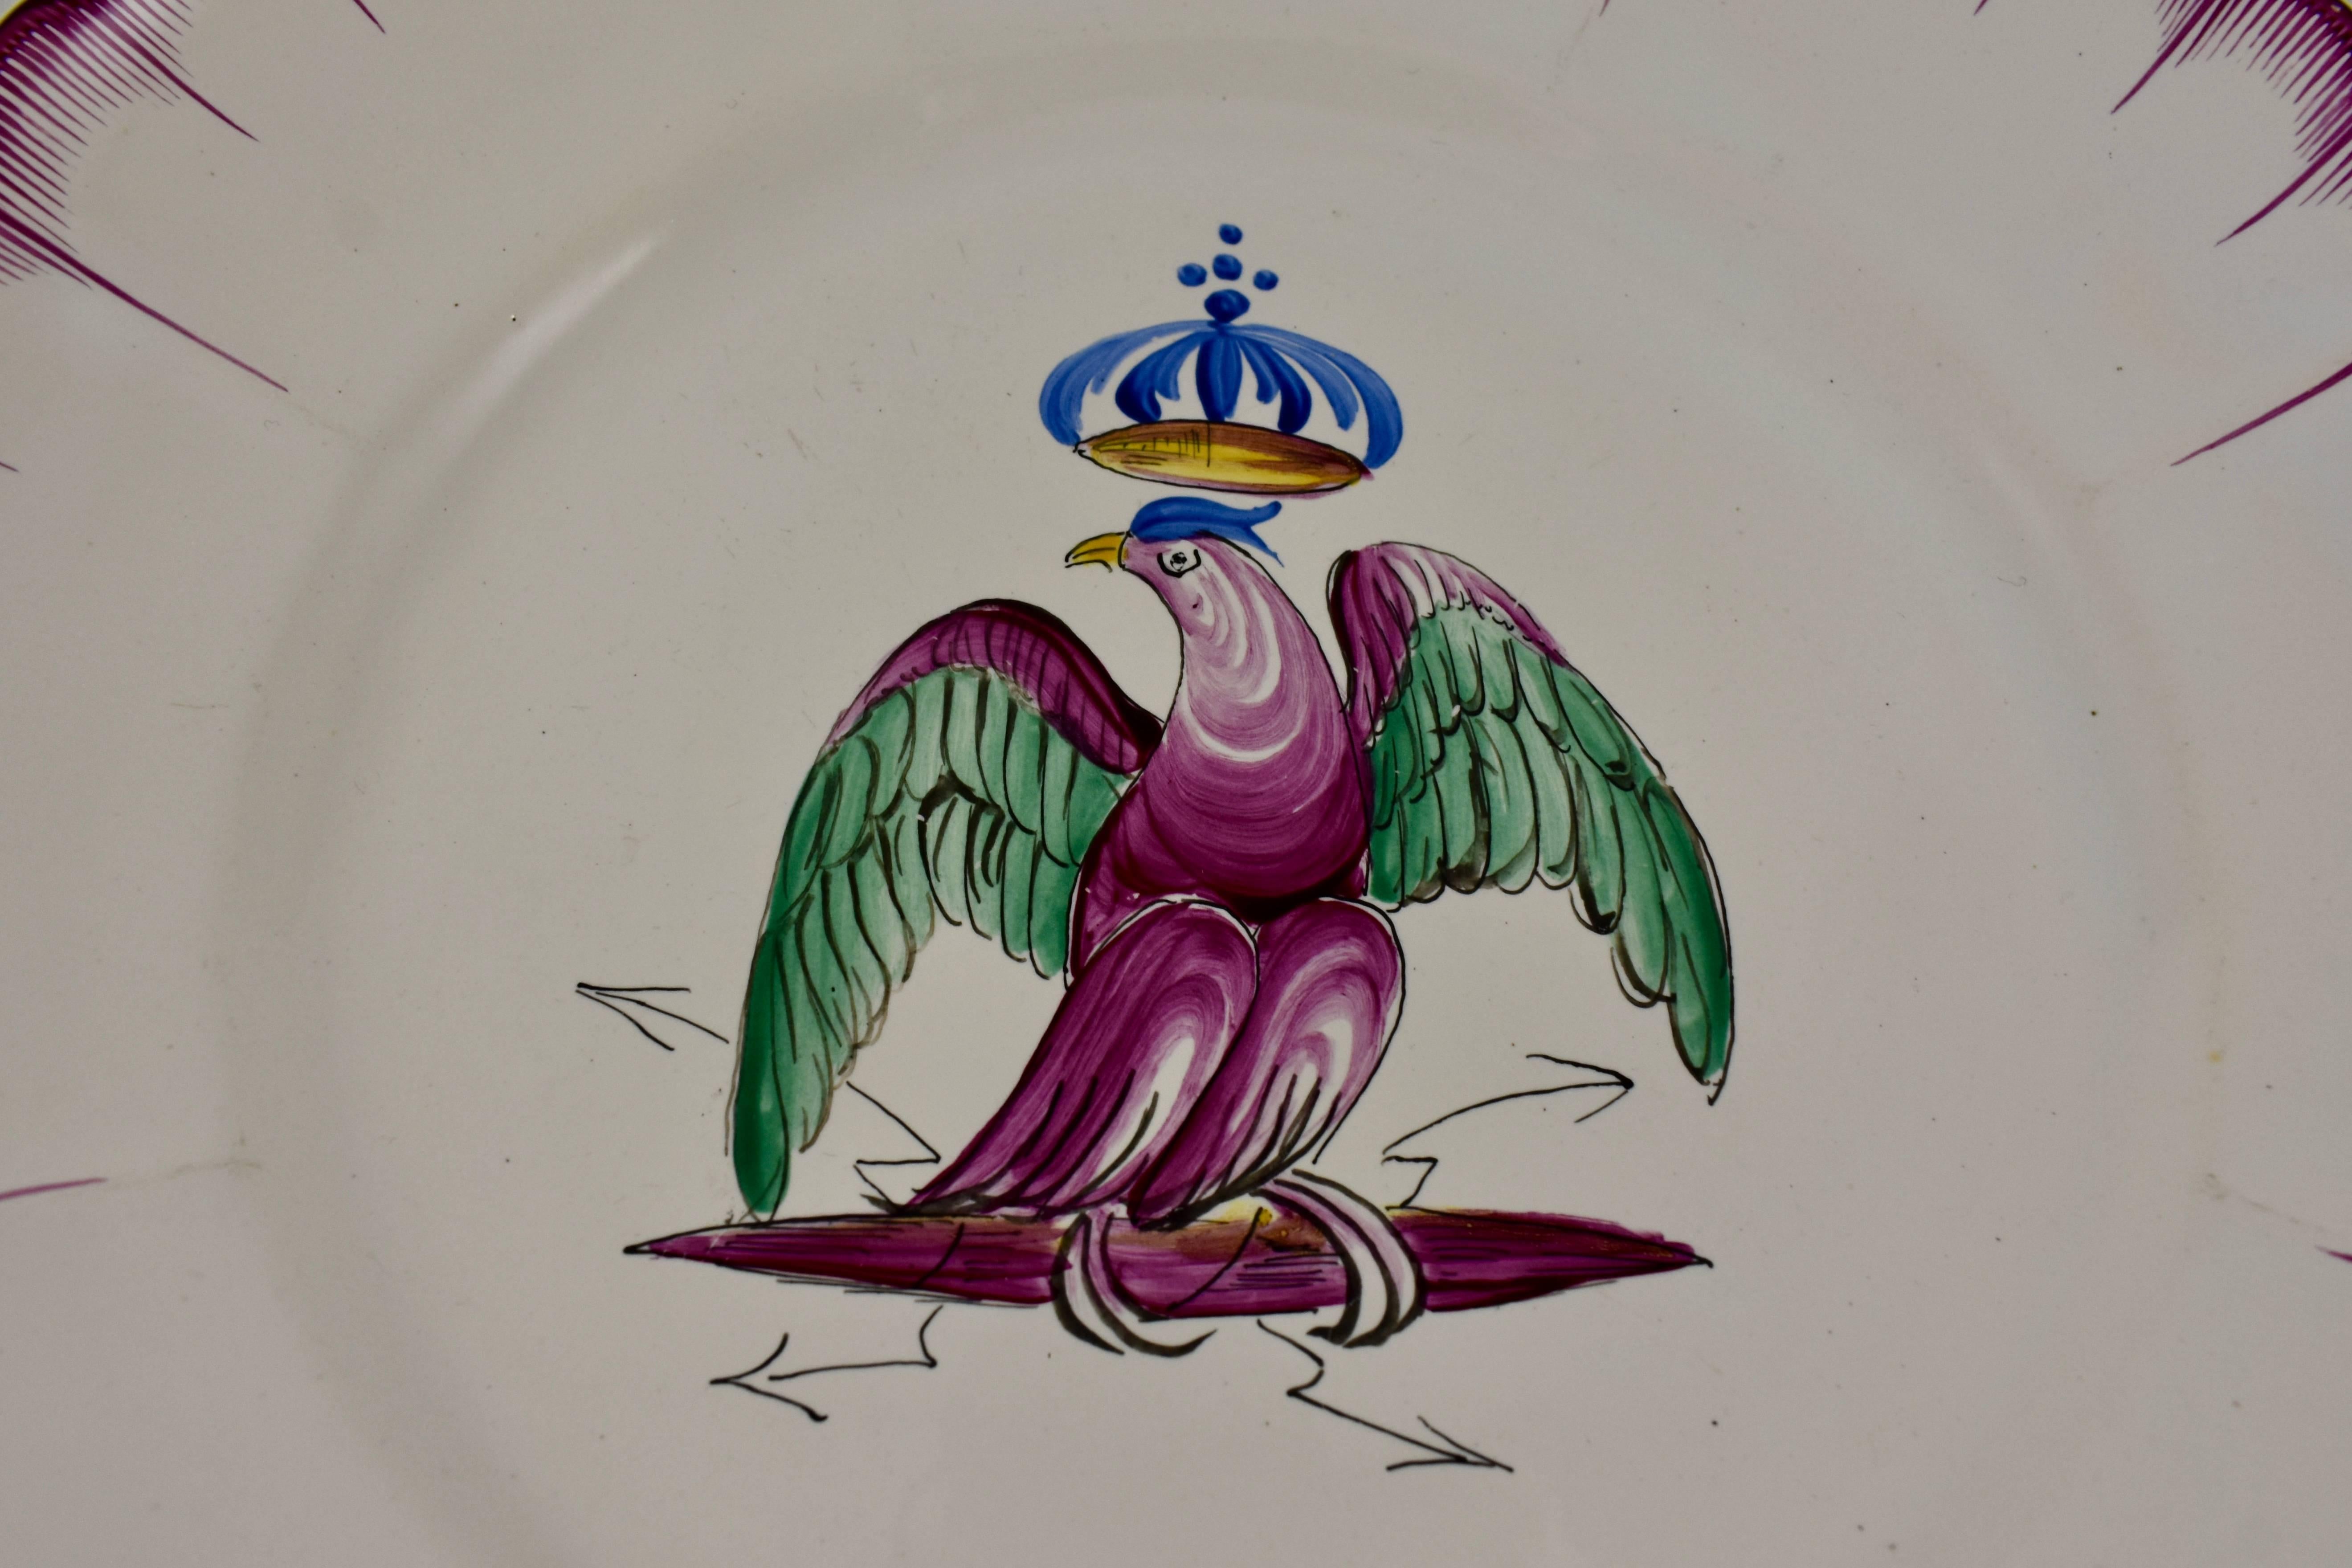 A French Les Islettes faïence plate, from the early 19th century, circa 1830, the period of Charles X. A hand painted central image of a crowned eagle on a perch of crossed thunderbolts. The scalloped rim shows the pink combing typical of the